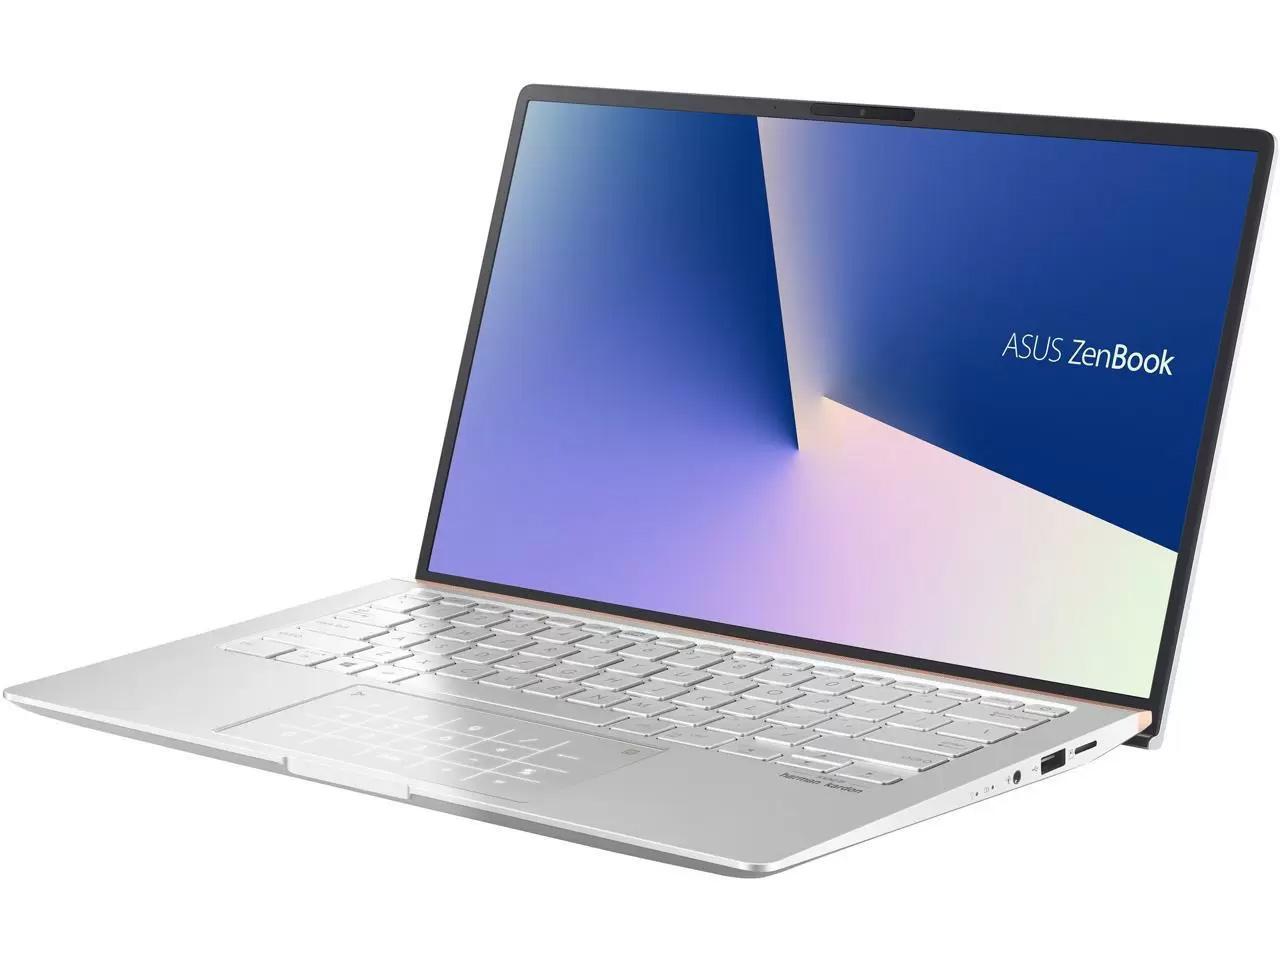 Asus ZenBook 14 Ryzen 5 8GB 256GB SSD Notebook Laptop for $549.99 Shipped